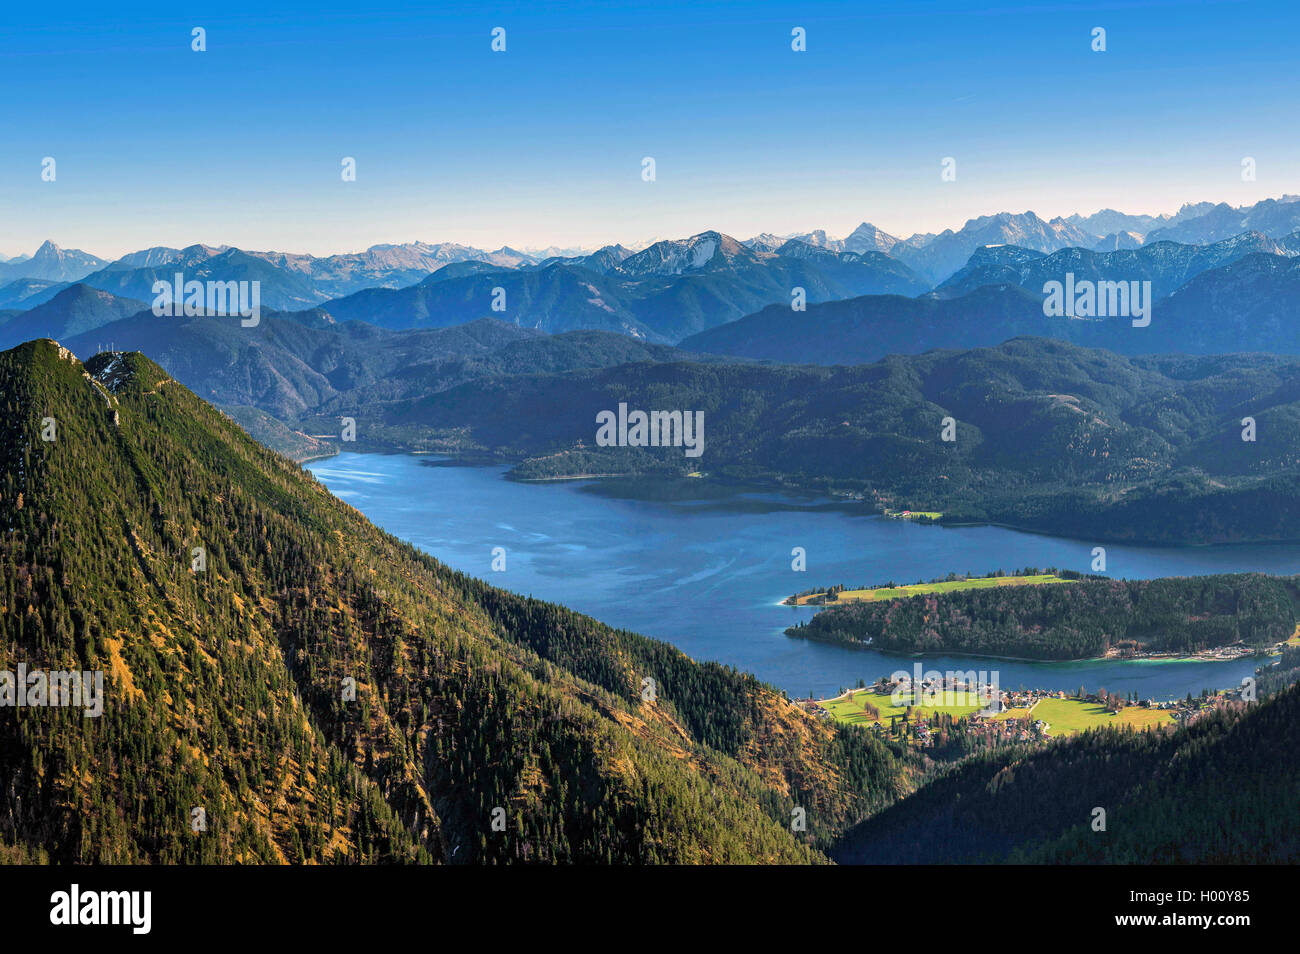 view from Heimgarten over the Walchensee with the Karwendel mountains in the background, Germany, Bavaria, Oberbayern, Upper Bavaria, Kocheler Berge Stock Photo